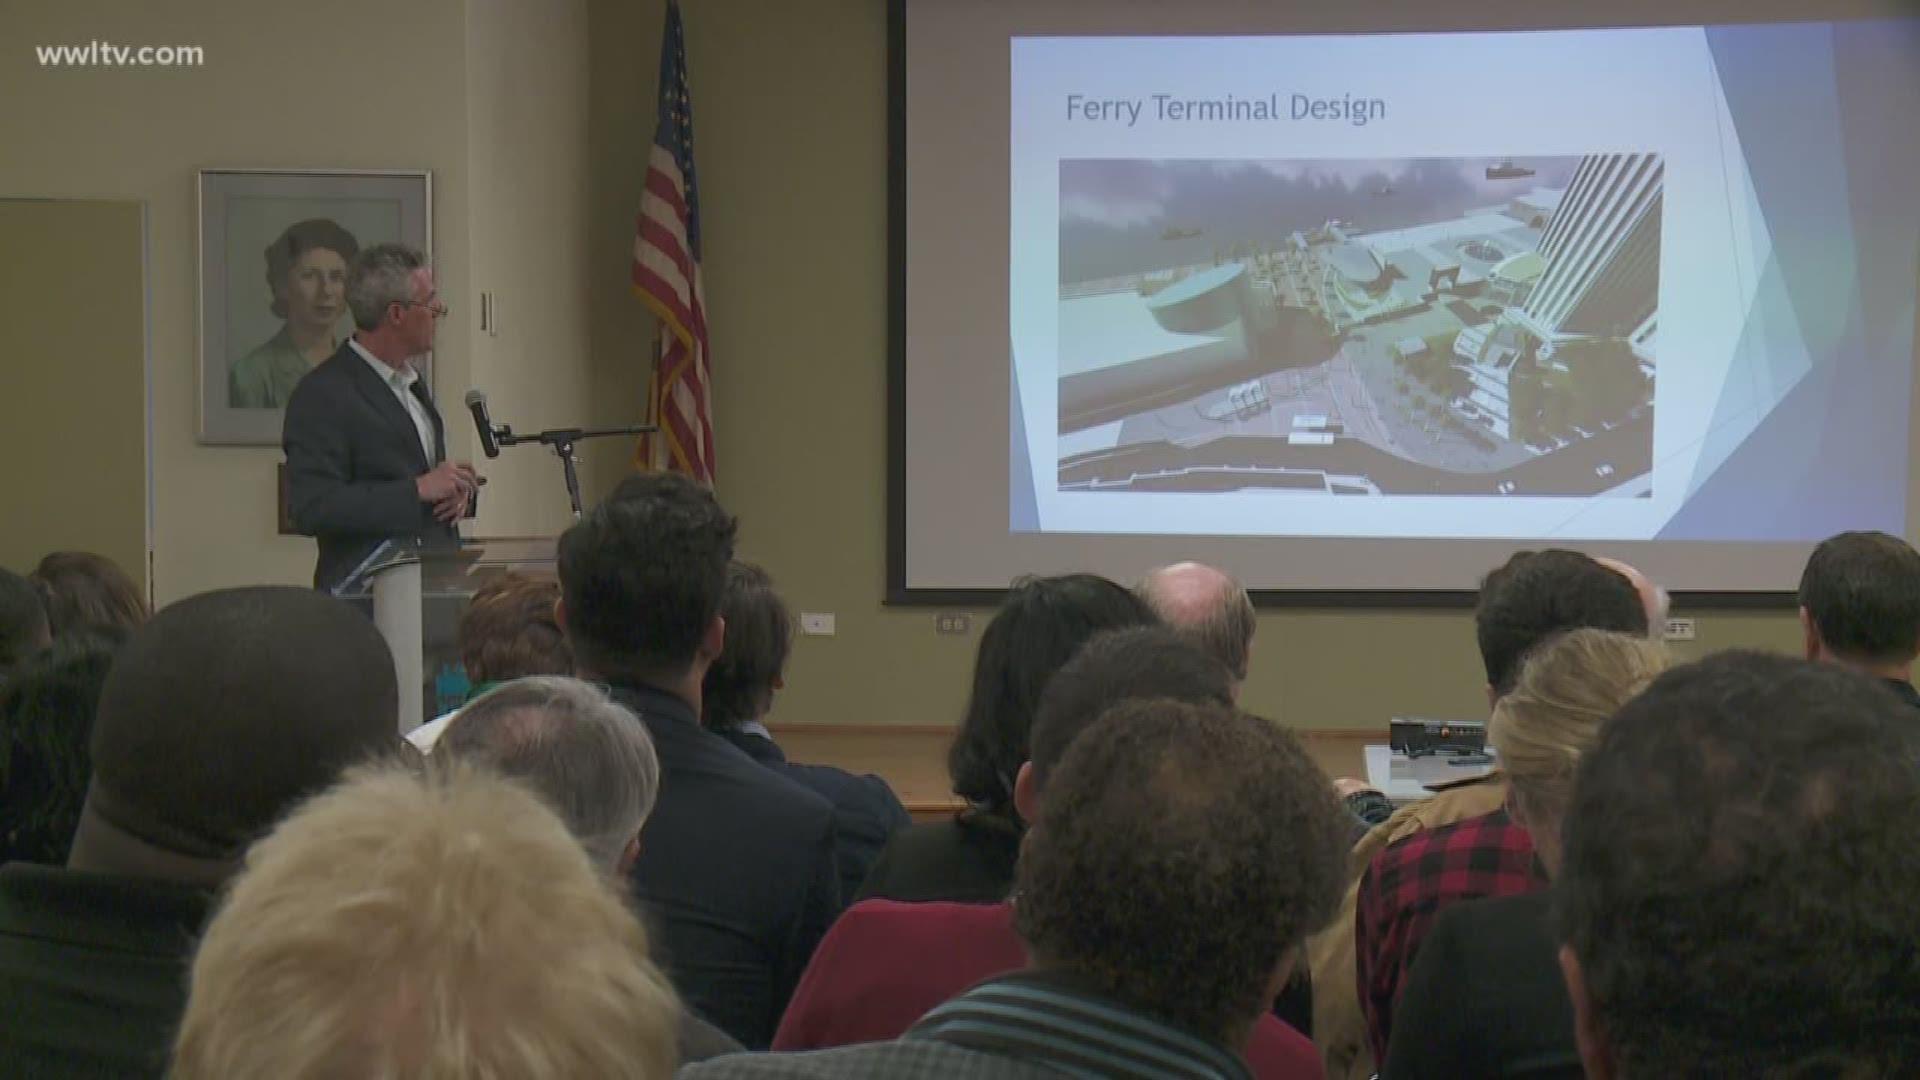 Officials with the RTA gave a presentation about the terminal design. 